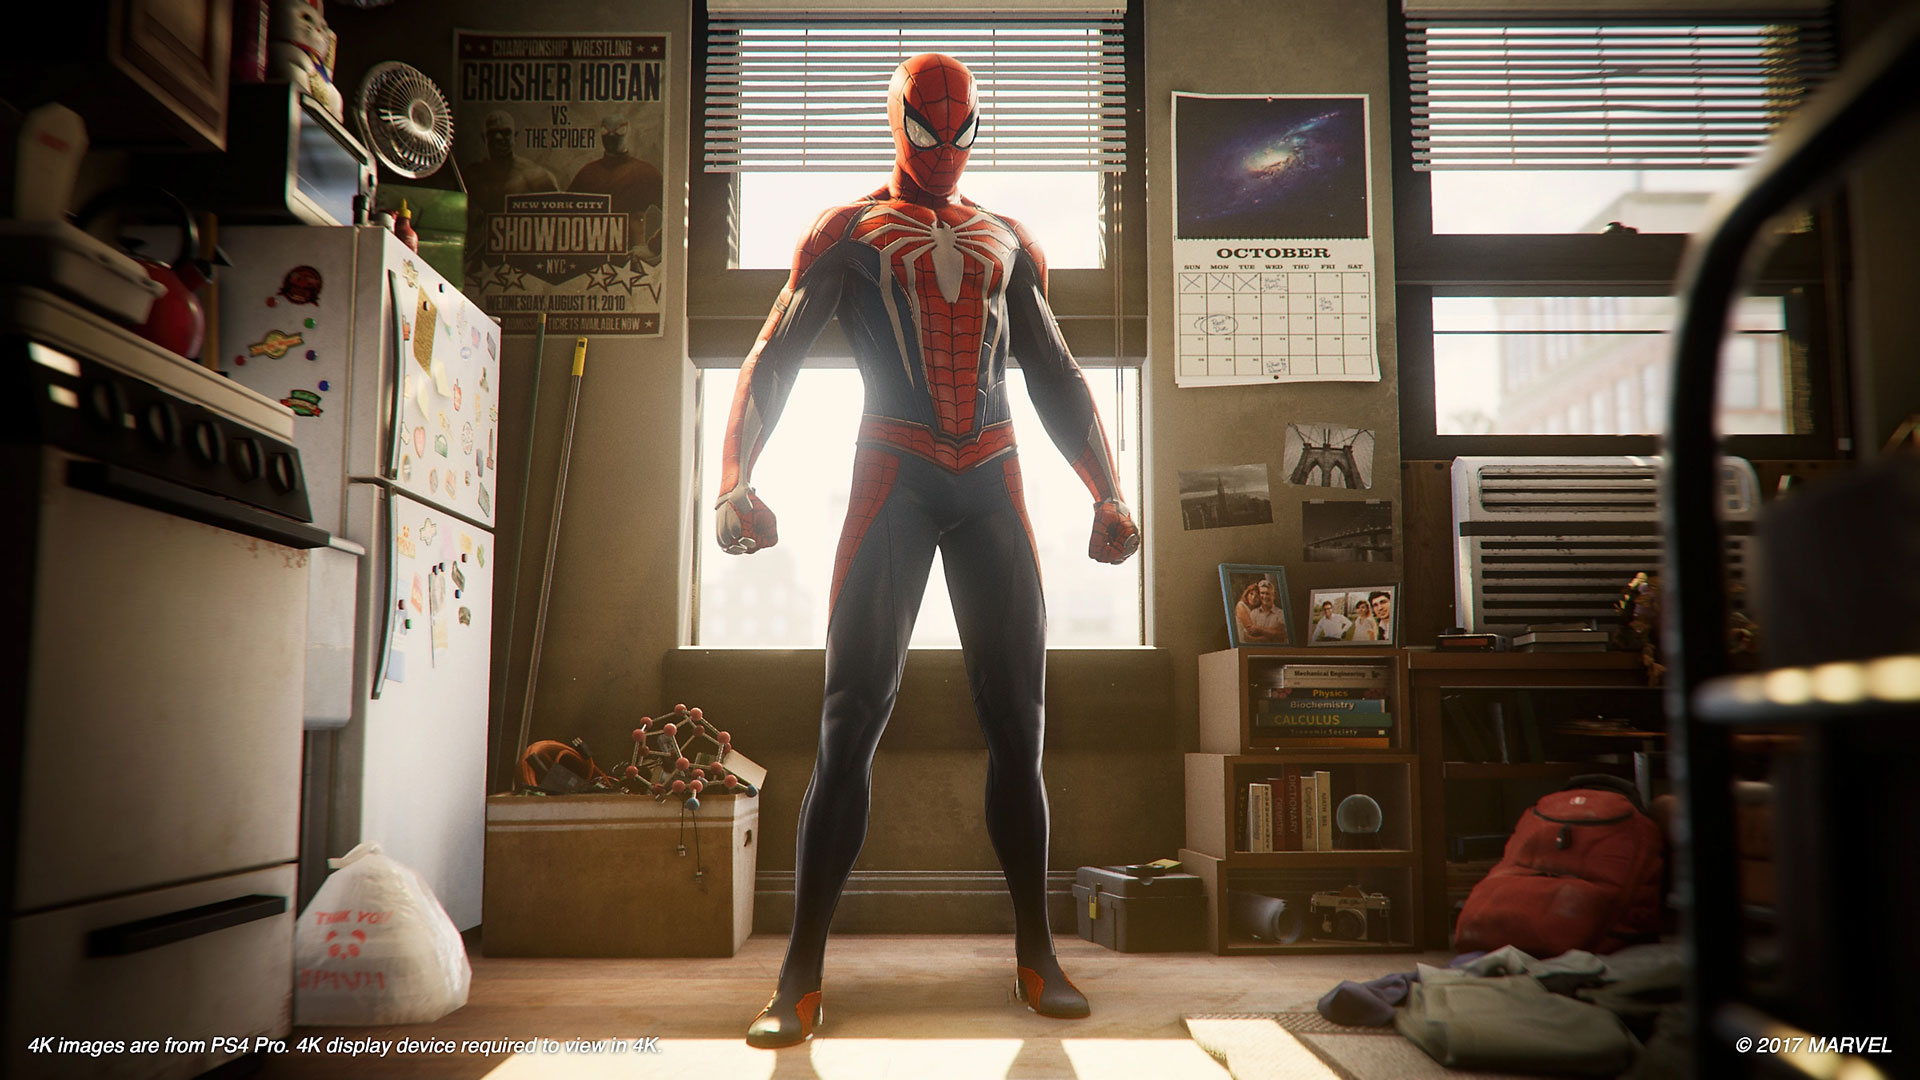 Jogo Marvel Spider-Man Game Of The Year Edition para PS4